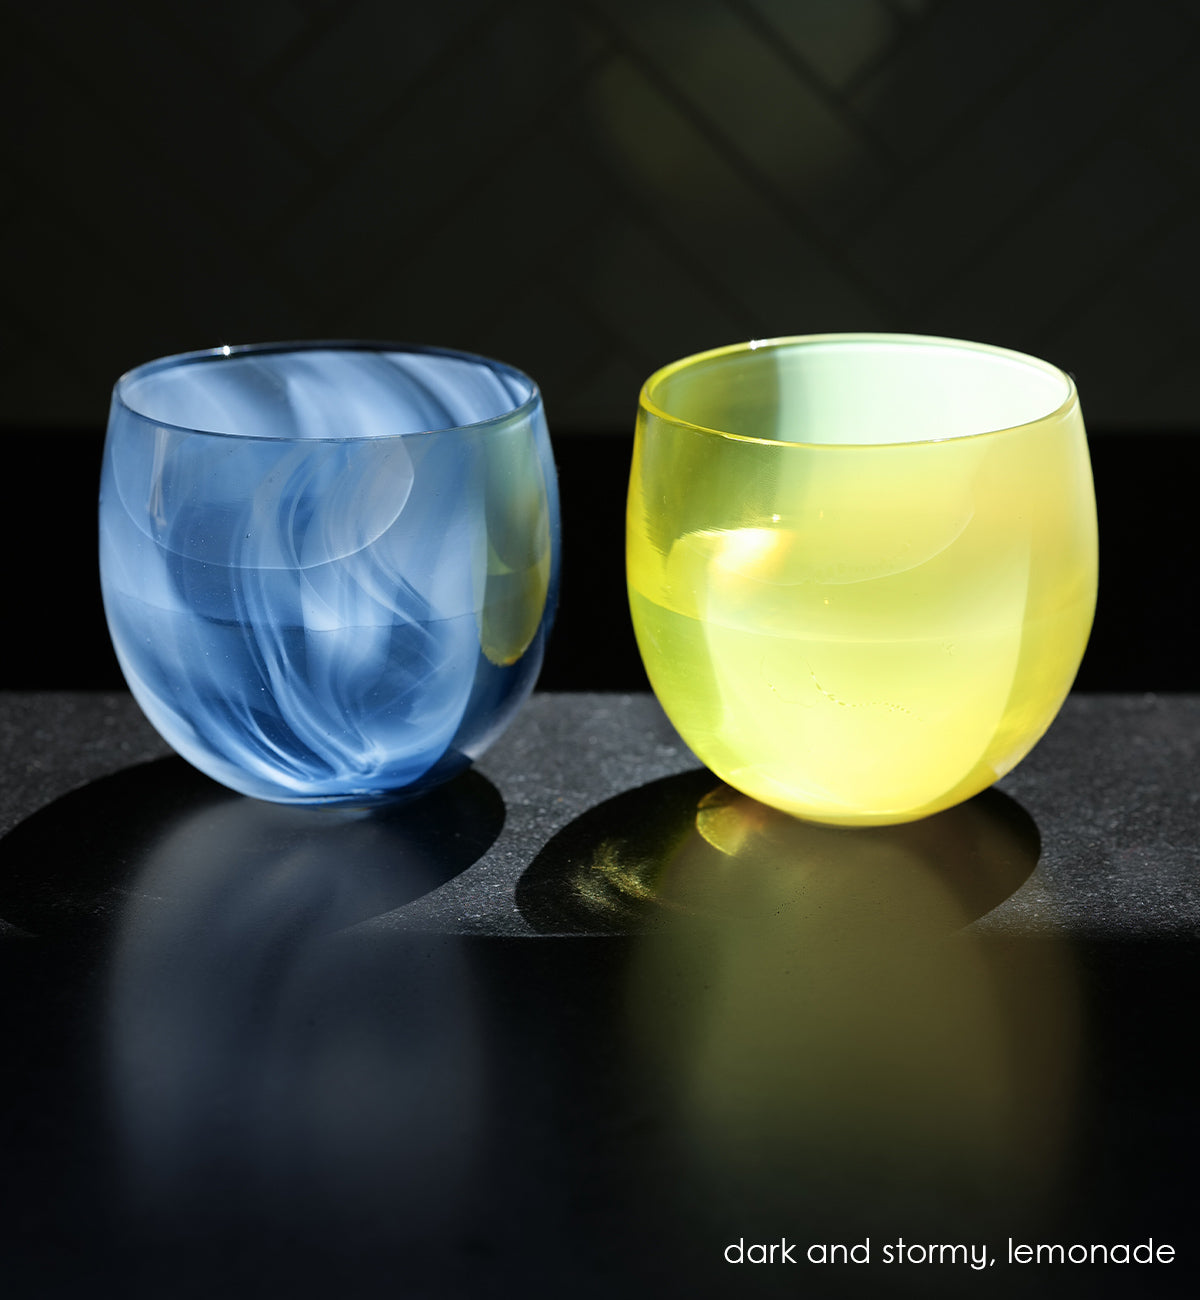 dark and stormy deep blue and white swirled together, to create this one-of-a-kind hand-blown glass. Paired with our vibrant yellow lemonade hand-blown drinking glass.